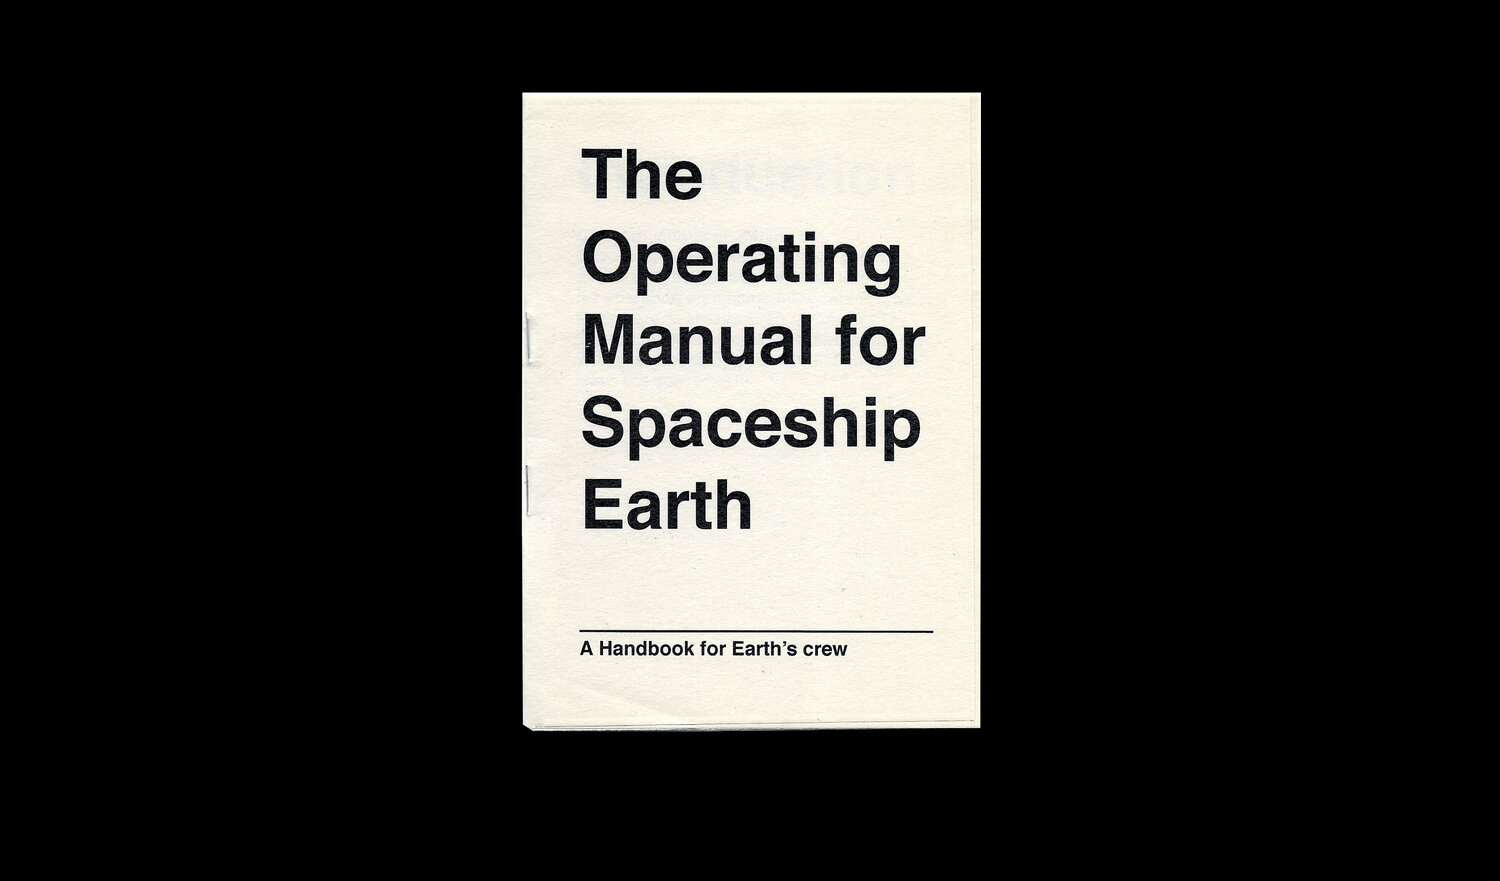 THE OPERATING MANUAL FOR SPACESHIP EARTH — FOTODEMIC